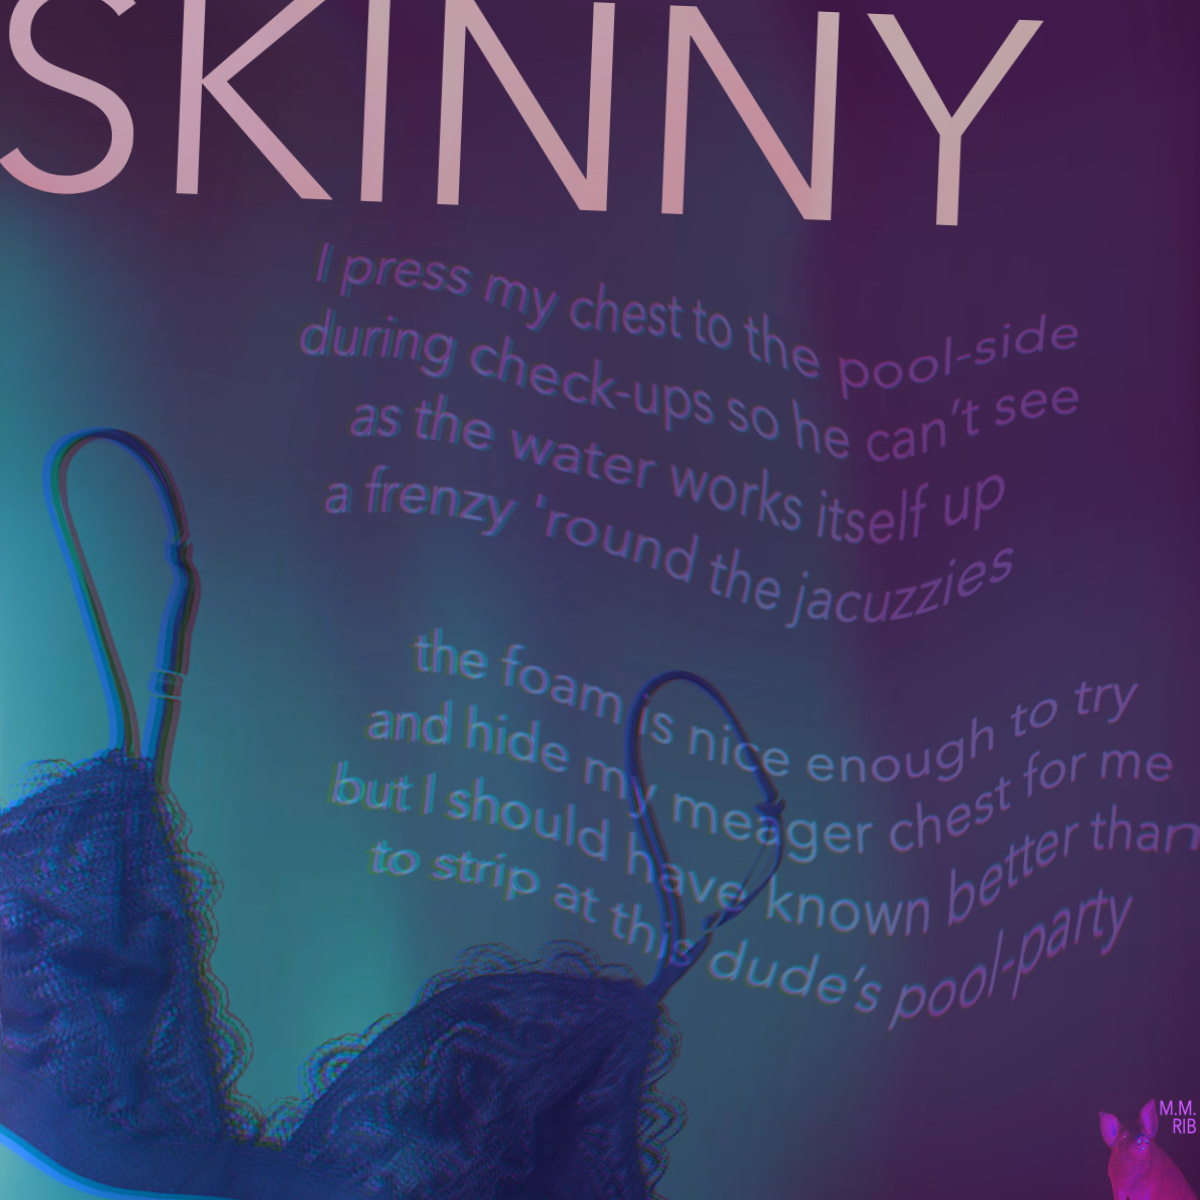 Faded text against a background of teal and purple water, reading:
"SKINNY
I press my chest to the pool-side
during check-ups so he can’t see
as the water works itself up
into a frenzy around the jacuzzies

the foam is nice enough to try
and hide my meager chest for me
but I should have known better than
to strip at this dude’s pool-party"
There is a purple bra floating in the bottom-left corner.
"M.M. RIB" is written in the bottom-right corner.
end image description